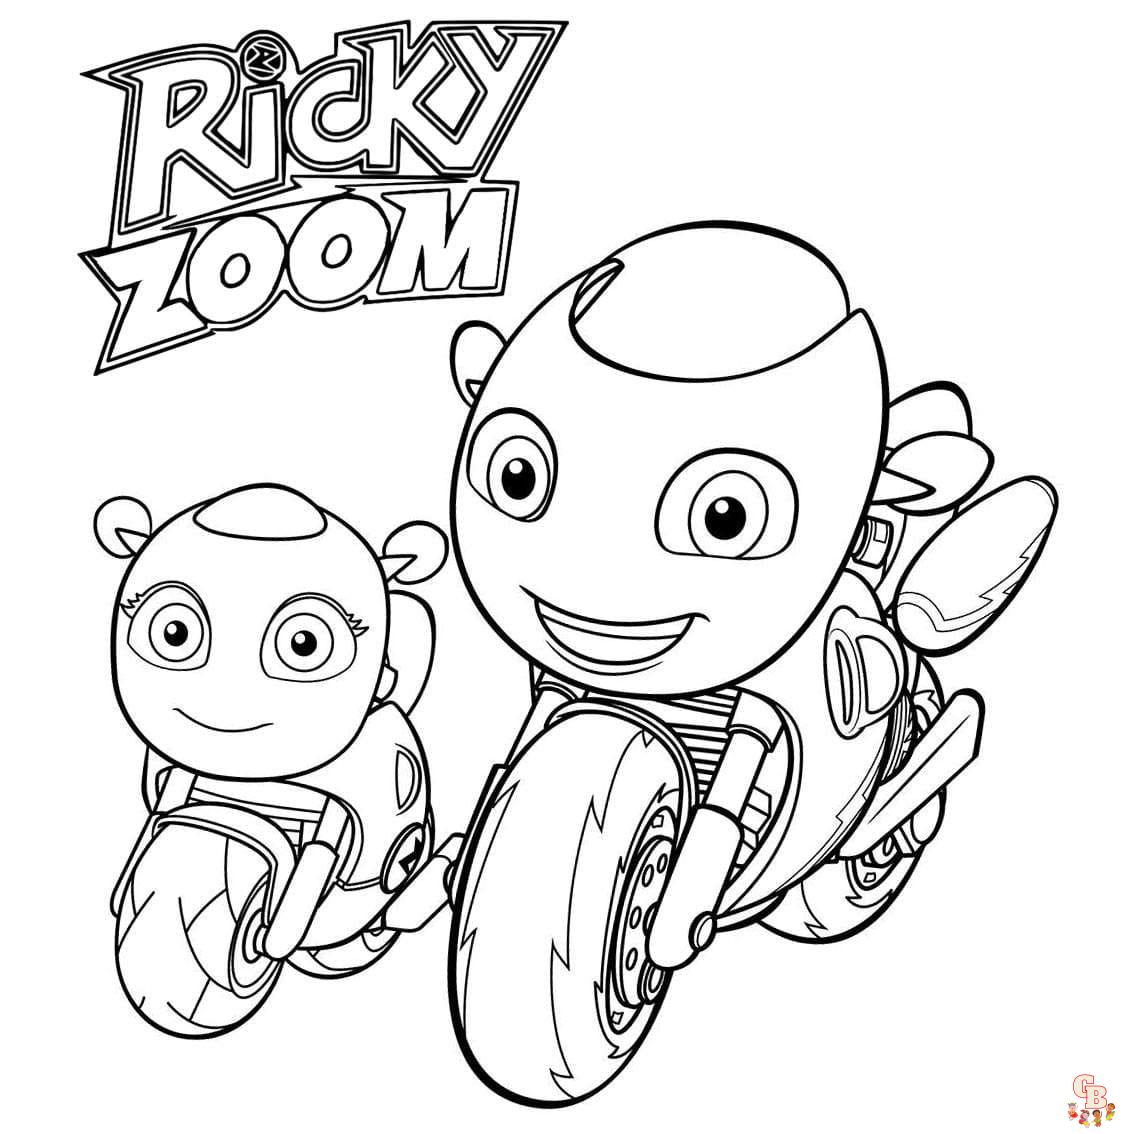 Coloriages Ricky Zoom